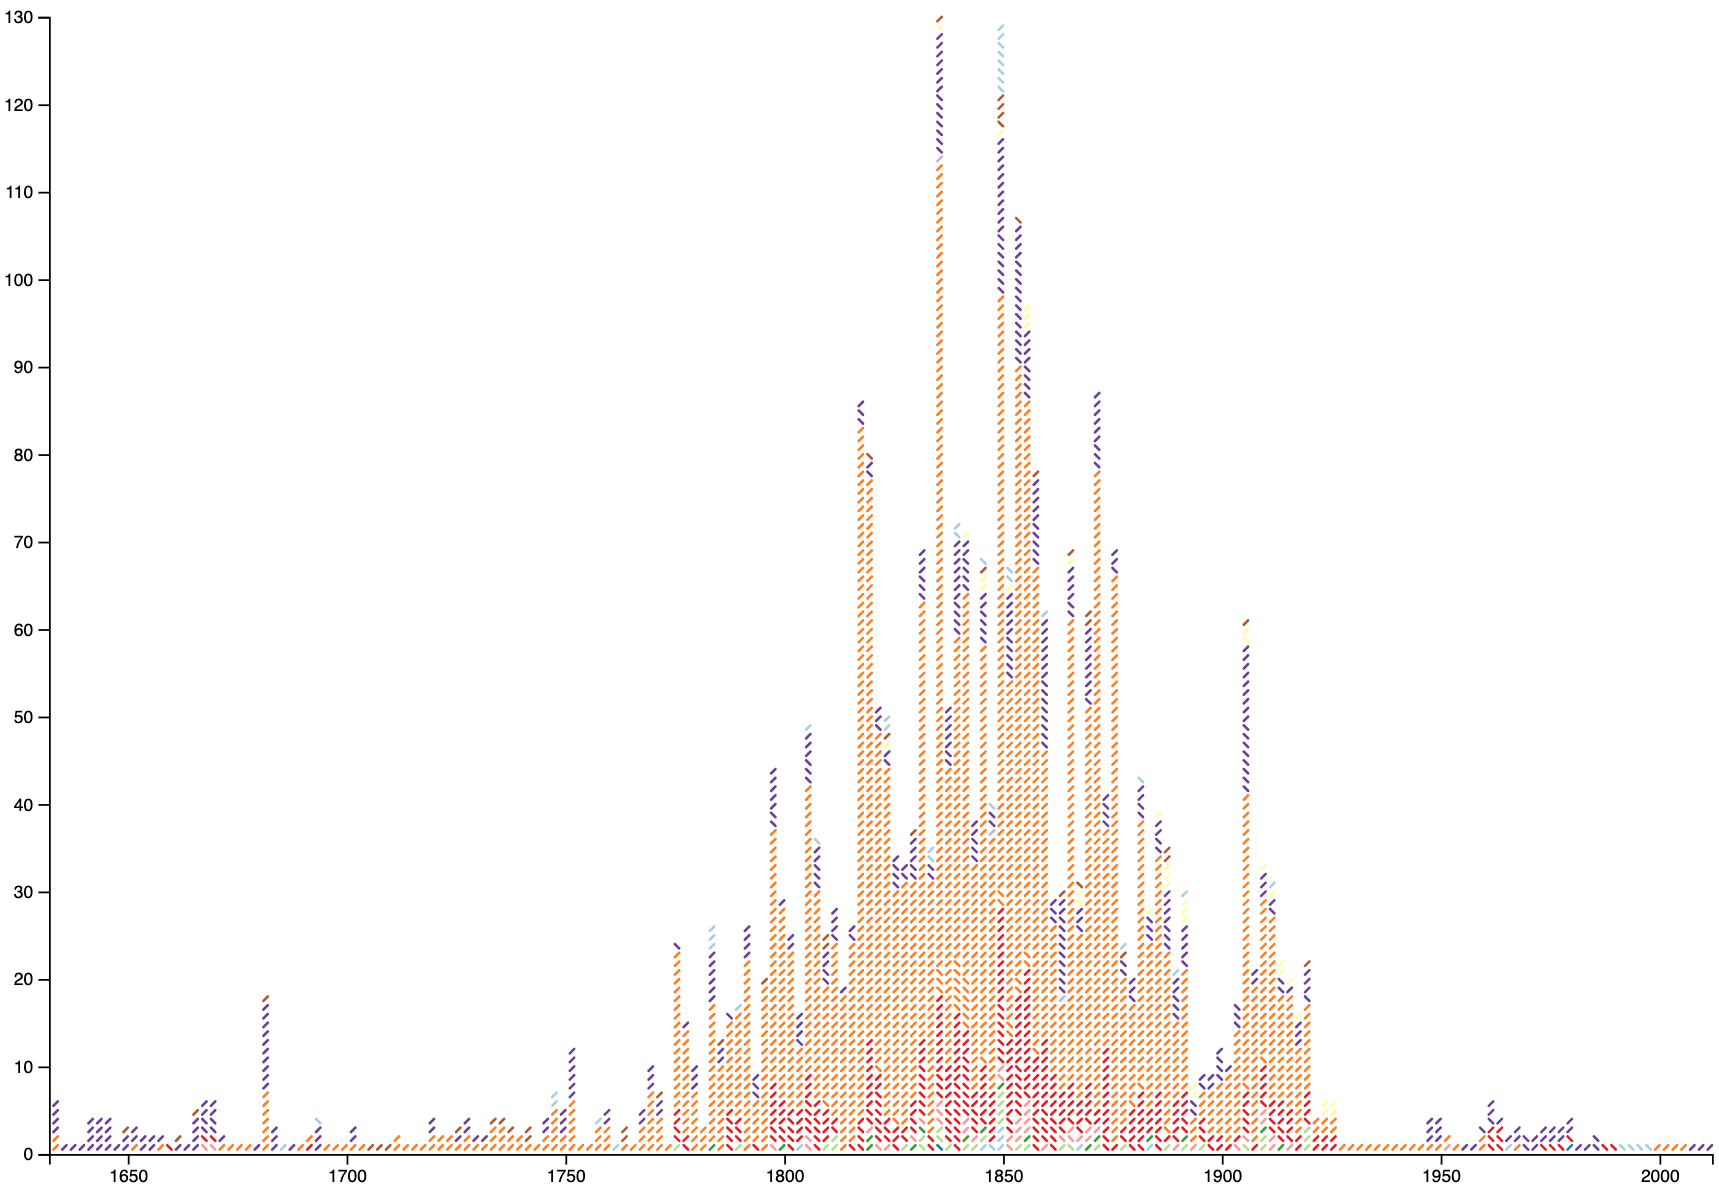 A histogram binning the number of counties named per decade. Each county is indicated by a symbol, colored by its name’s category and oriented to indicate its high-level language family.